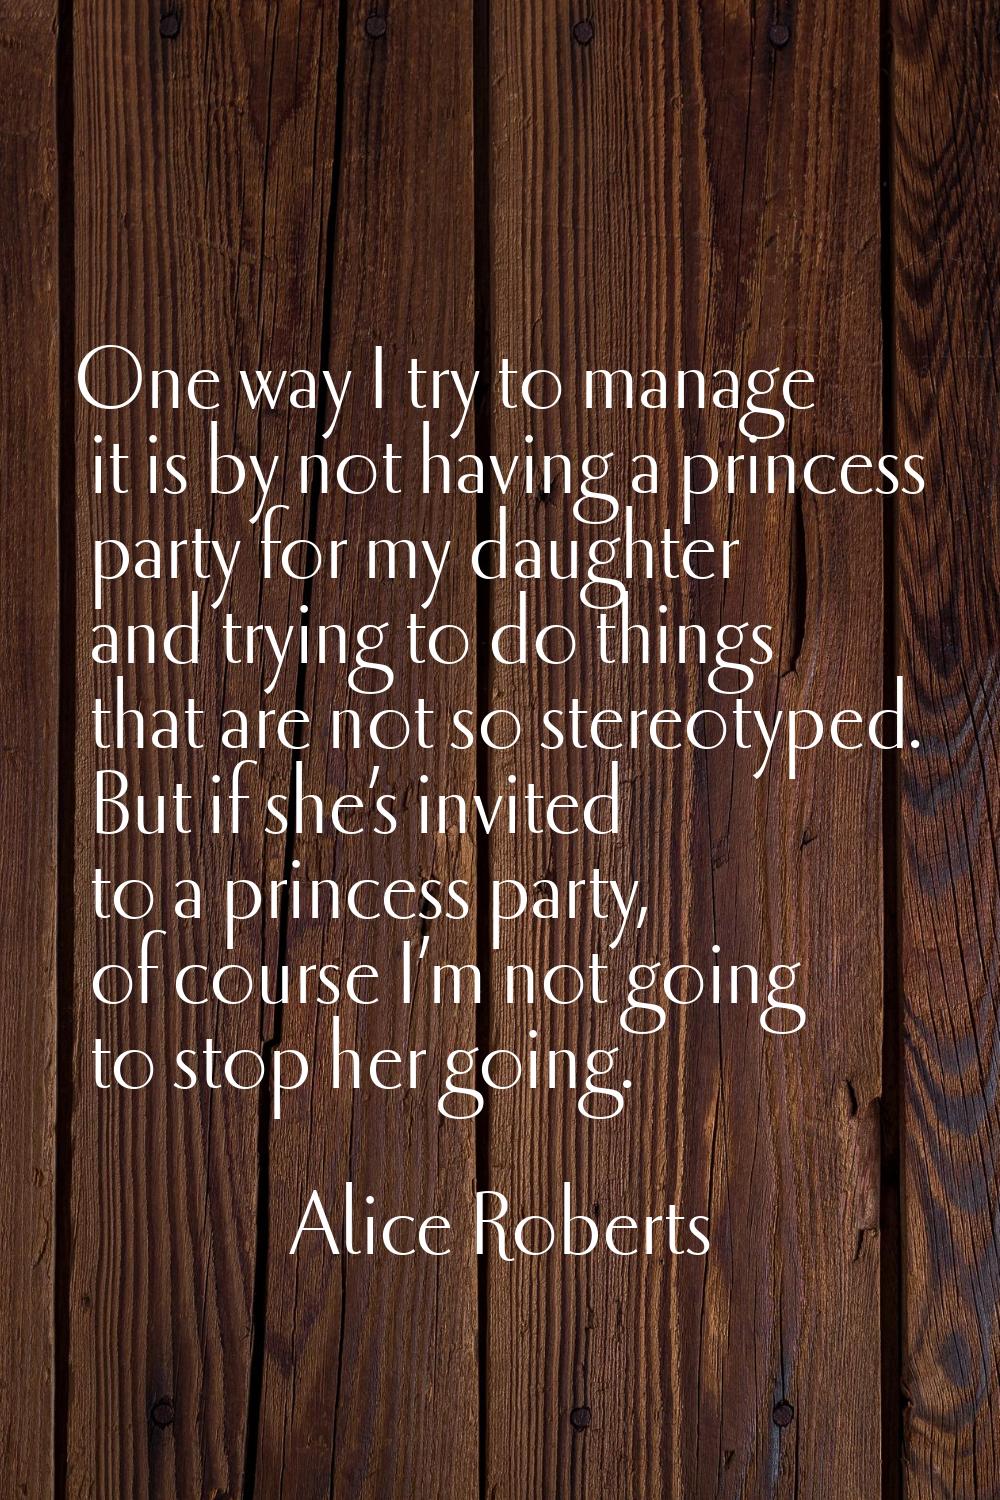 One way I try to manage it is by not having a princess party for my daughter and trying to do thing